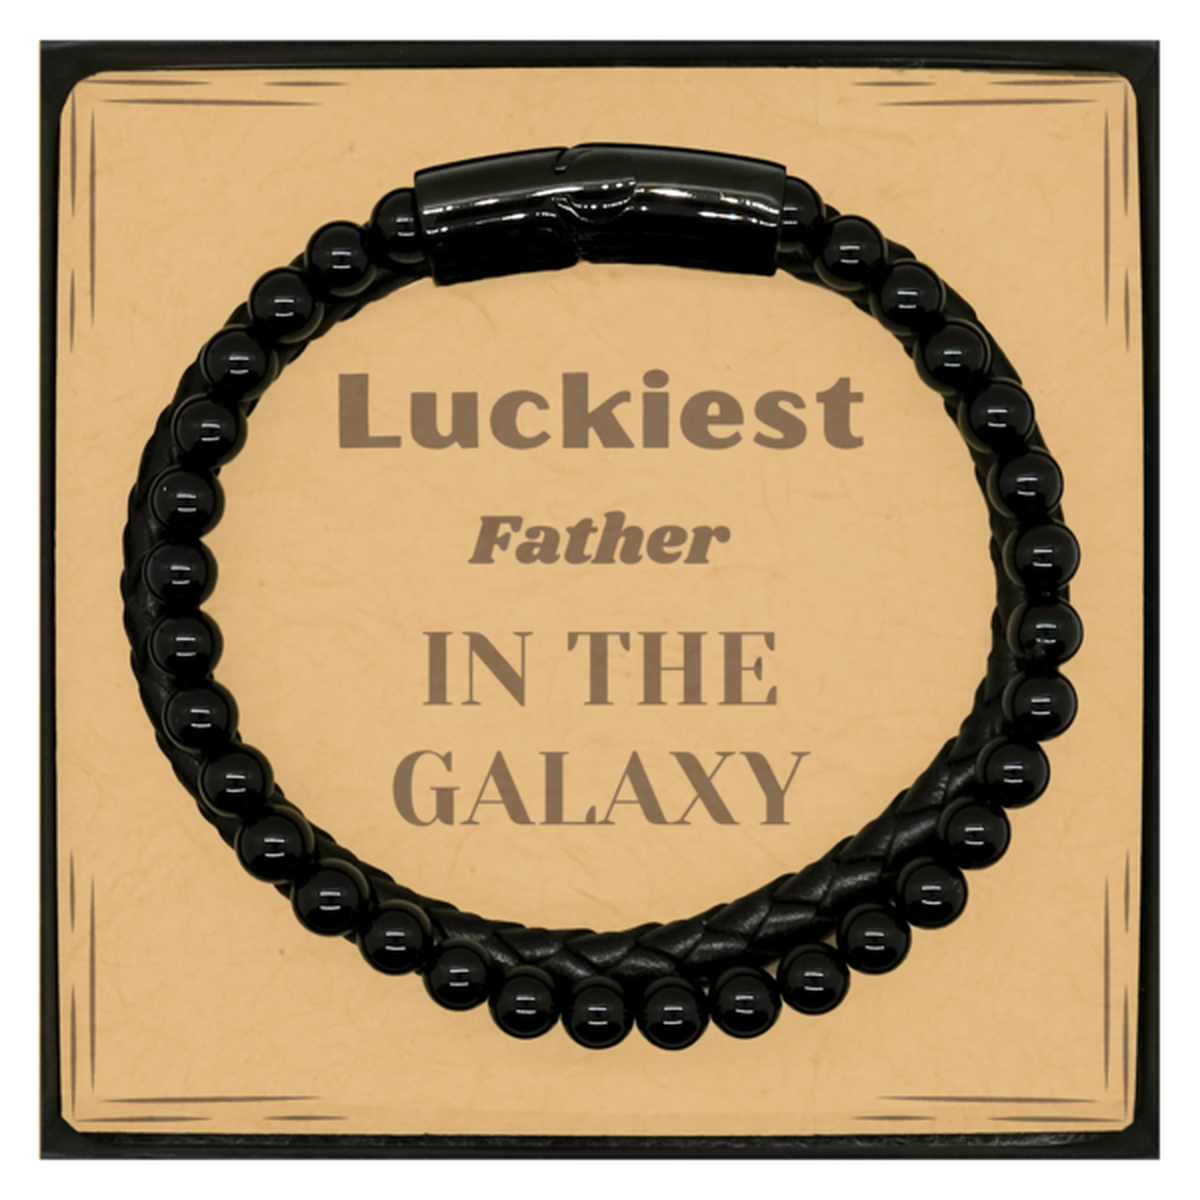 Luckiest Father in the Galaxy, To My Father Message Card Gifts, Christmas Father Stone Leather Bracelets Gifts, X-mas Birthday Unique Gifts For Father Men Women